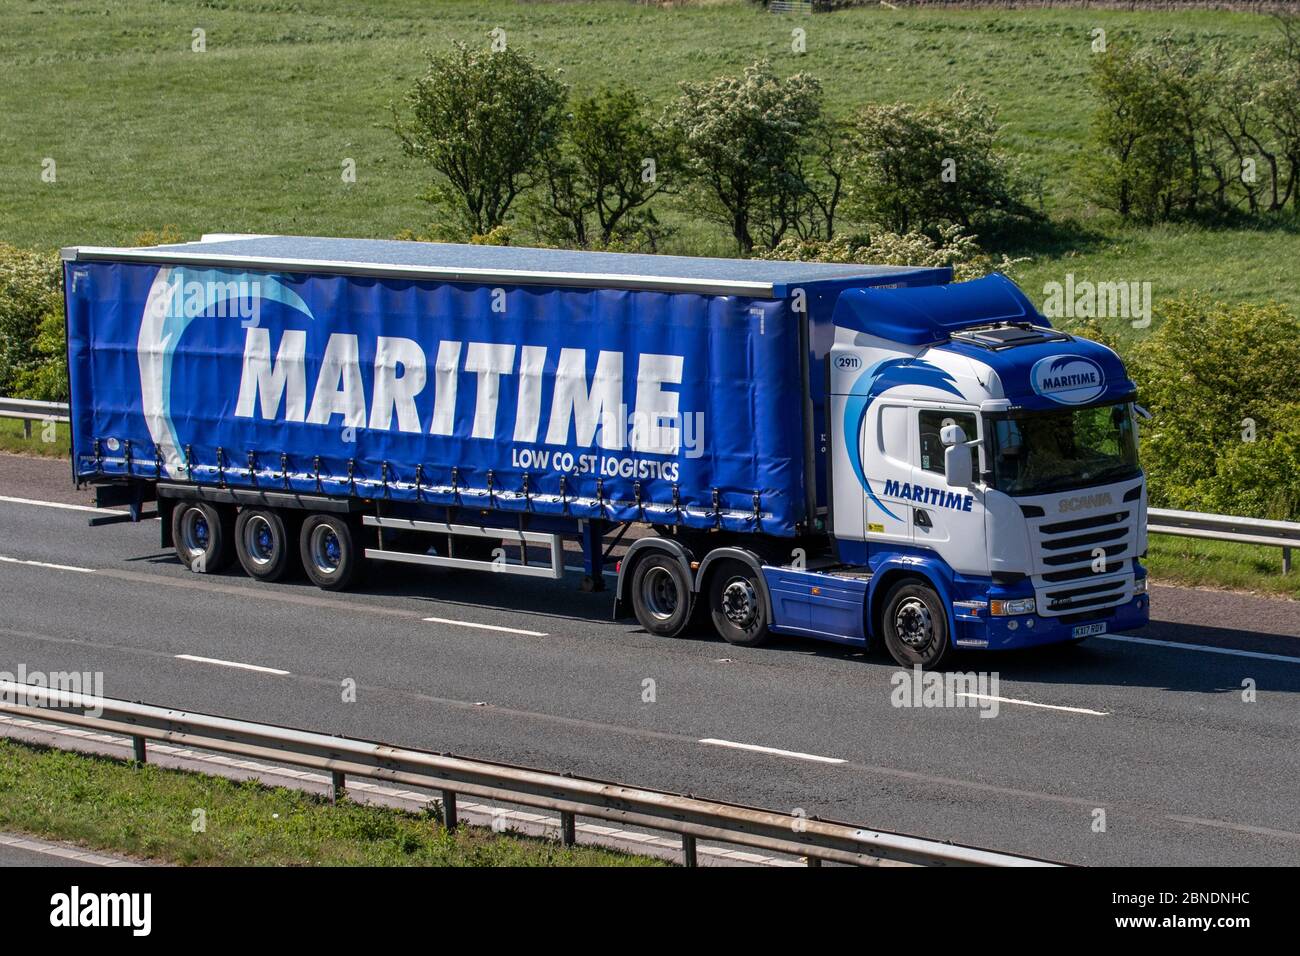 Maritime Haulage delivery trucks, articulated lorry, transportation, truck, cargo carrier, Scania vehicle, European commercial transport, industry, M61 at Manchester, UK Stock Photo